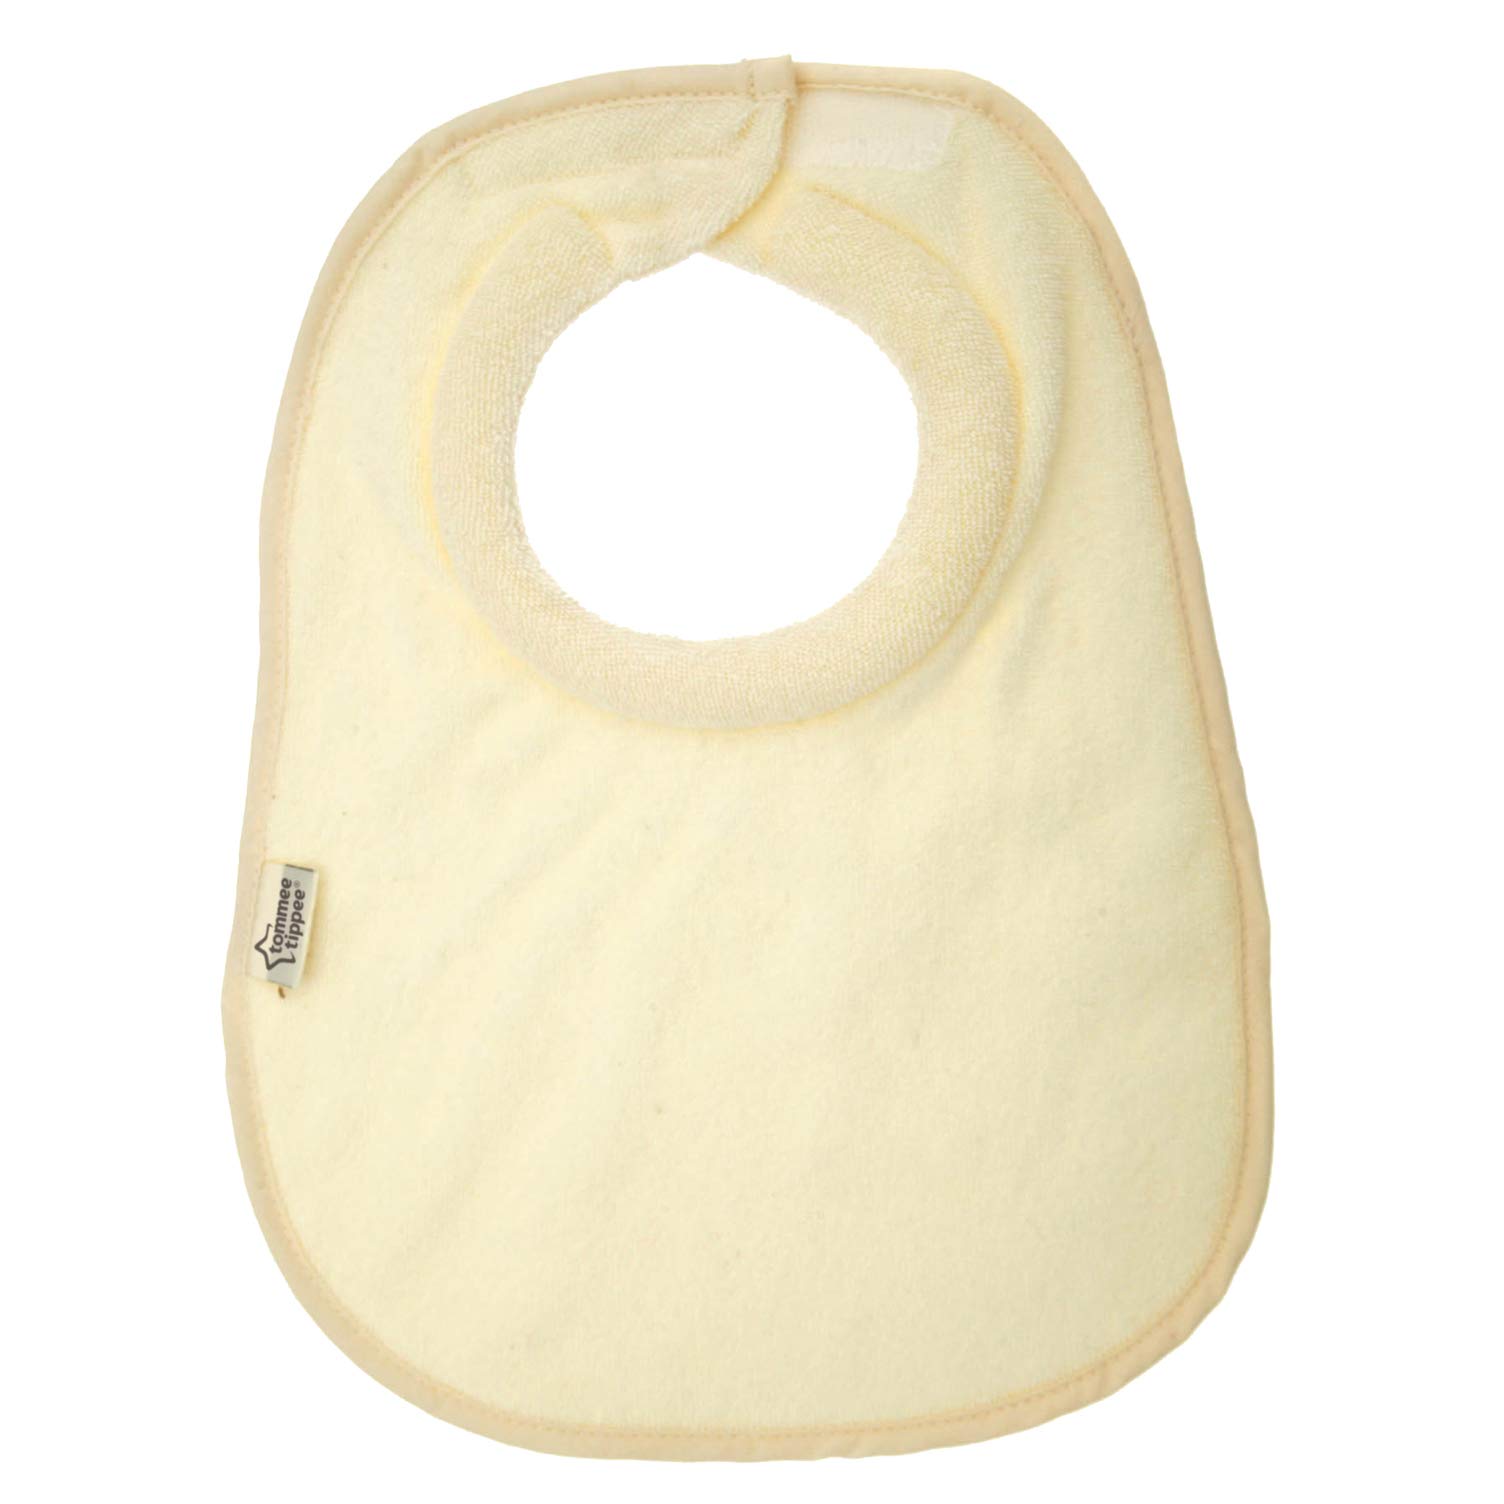 Tommee Tippee Closer to Nature Comfi-Neck Baby Bib with Padded Collar, Reversible – Cream Chevron, 2 Count